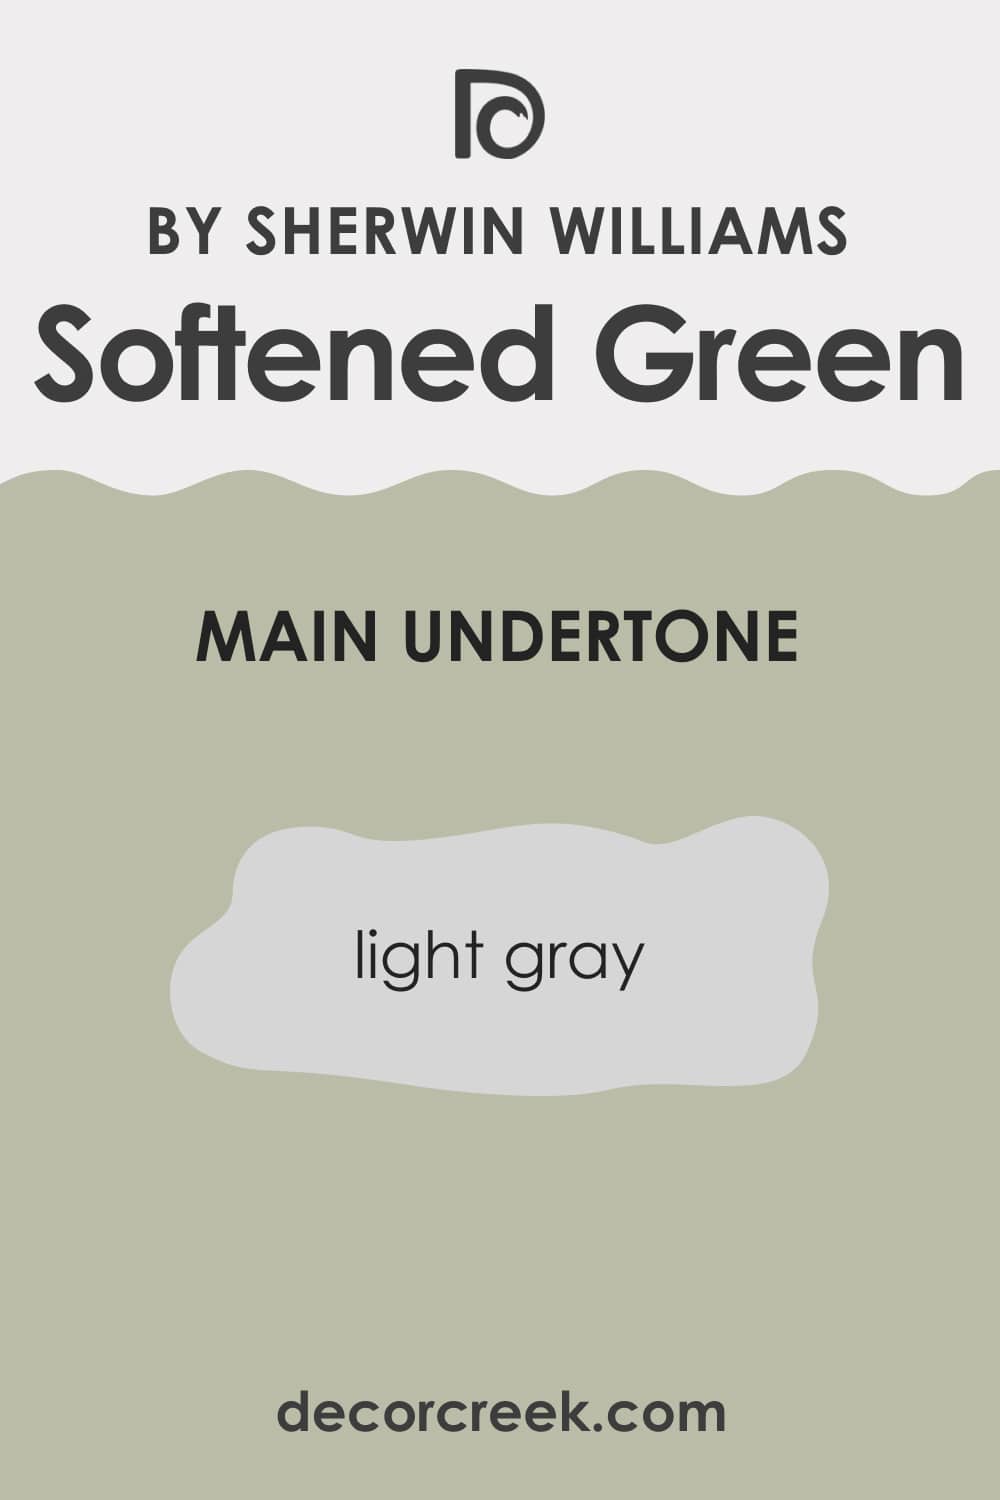 What Undertones Does Softened Green SW-6177 Have?